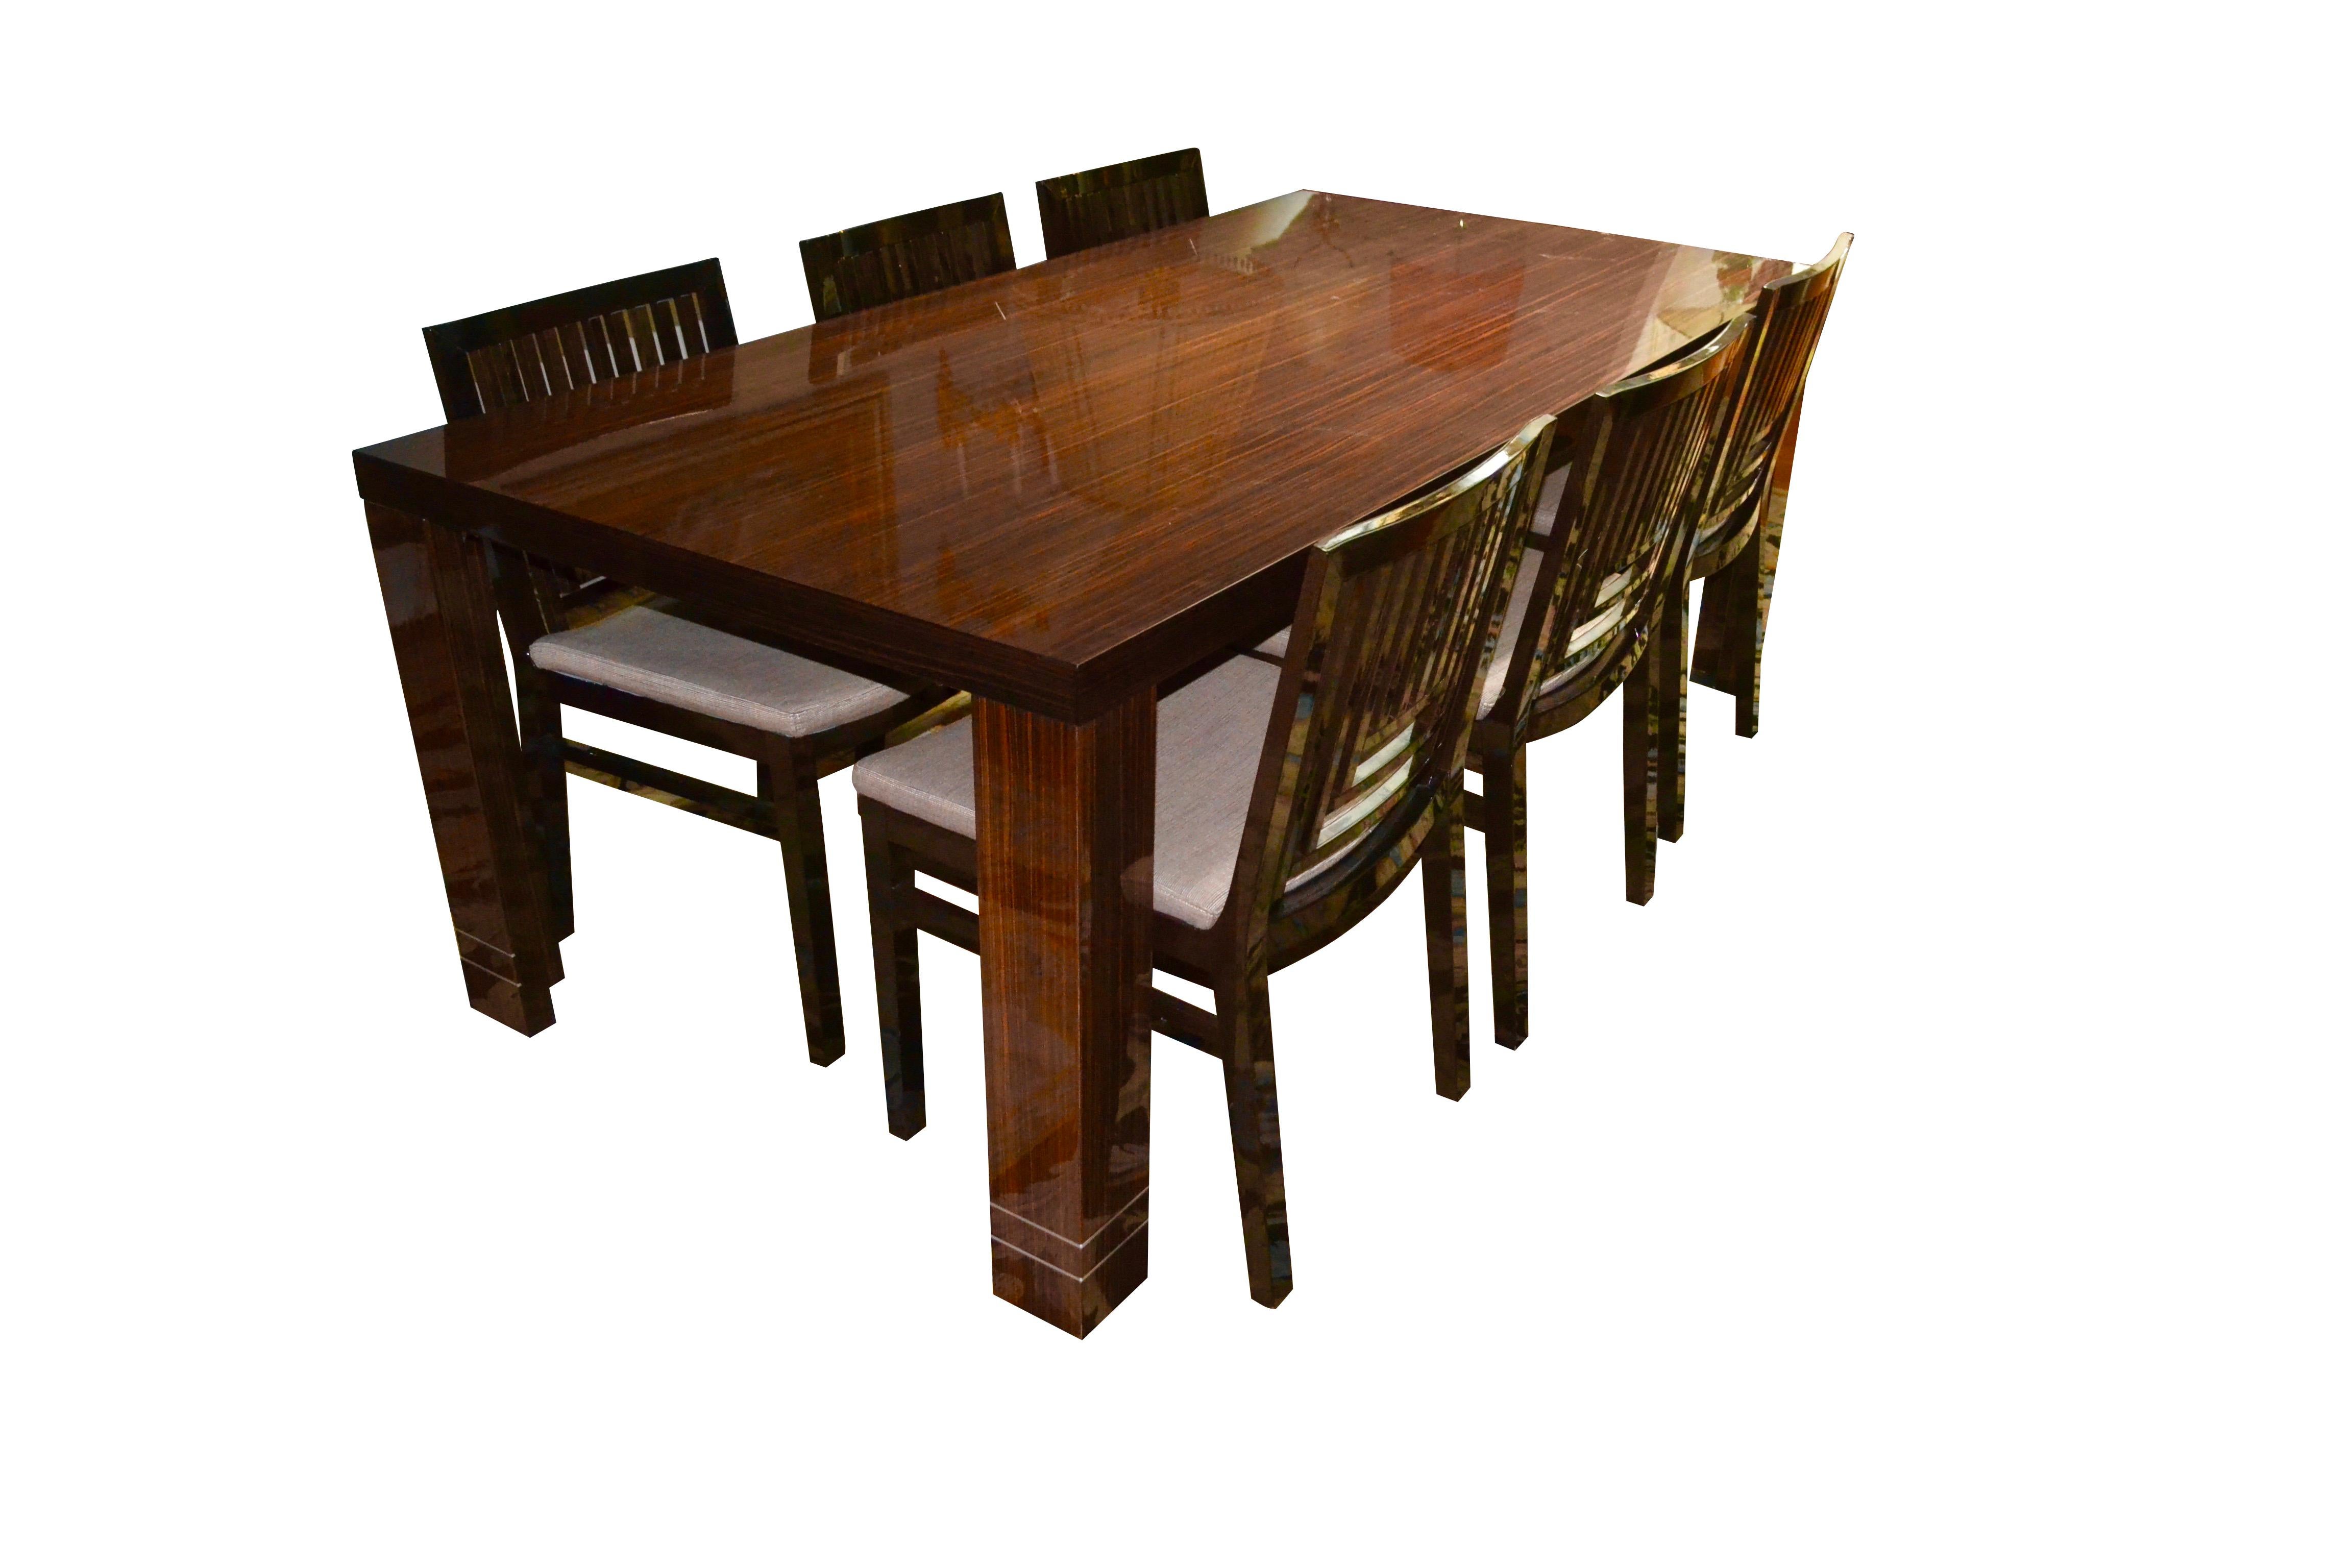 A Classic French Art Deco style dining table together with eight matching chairs. The suite is entirely of veneered Macassar ebony in highly polished lacquer. Near the bottom of each leg are two decorative metal filets, the only decorative element